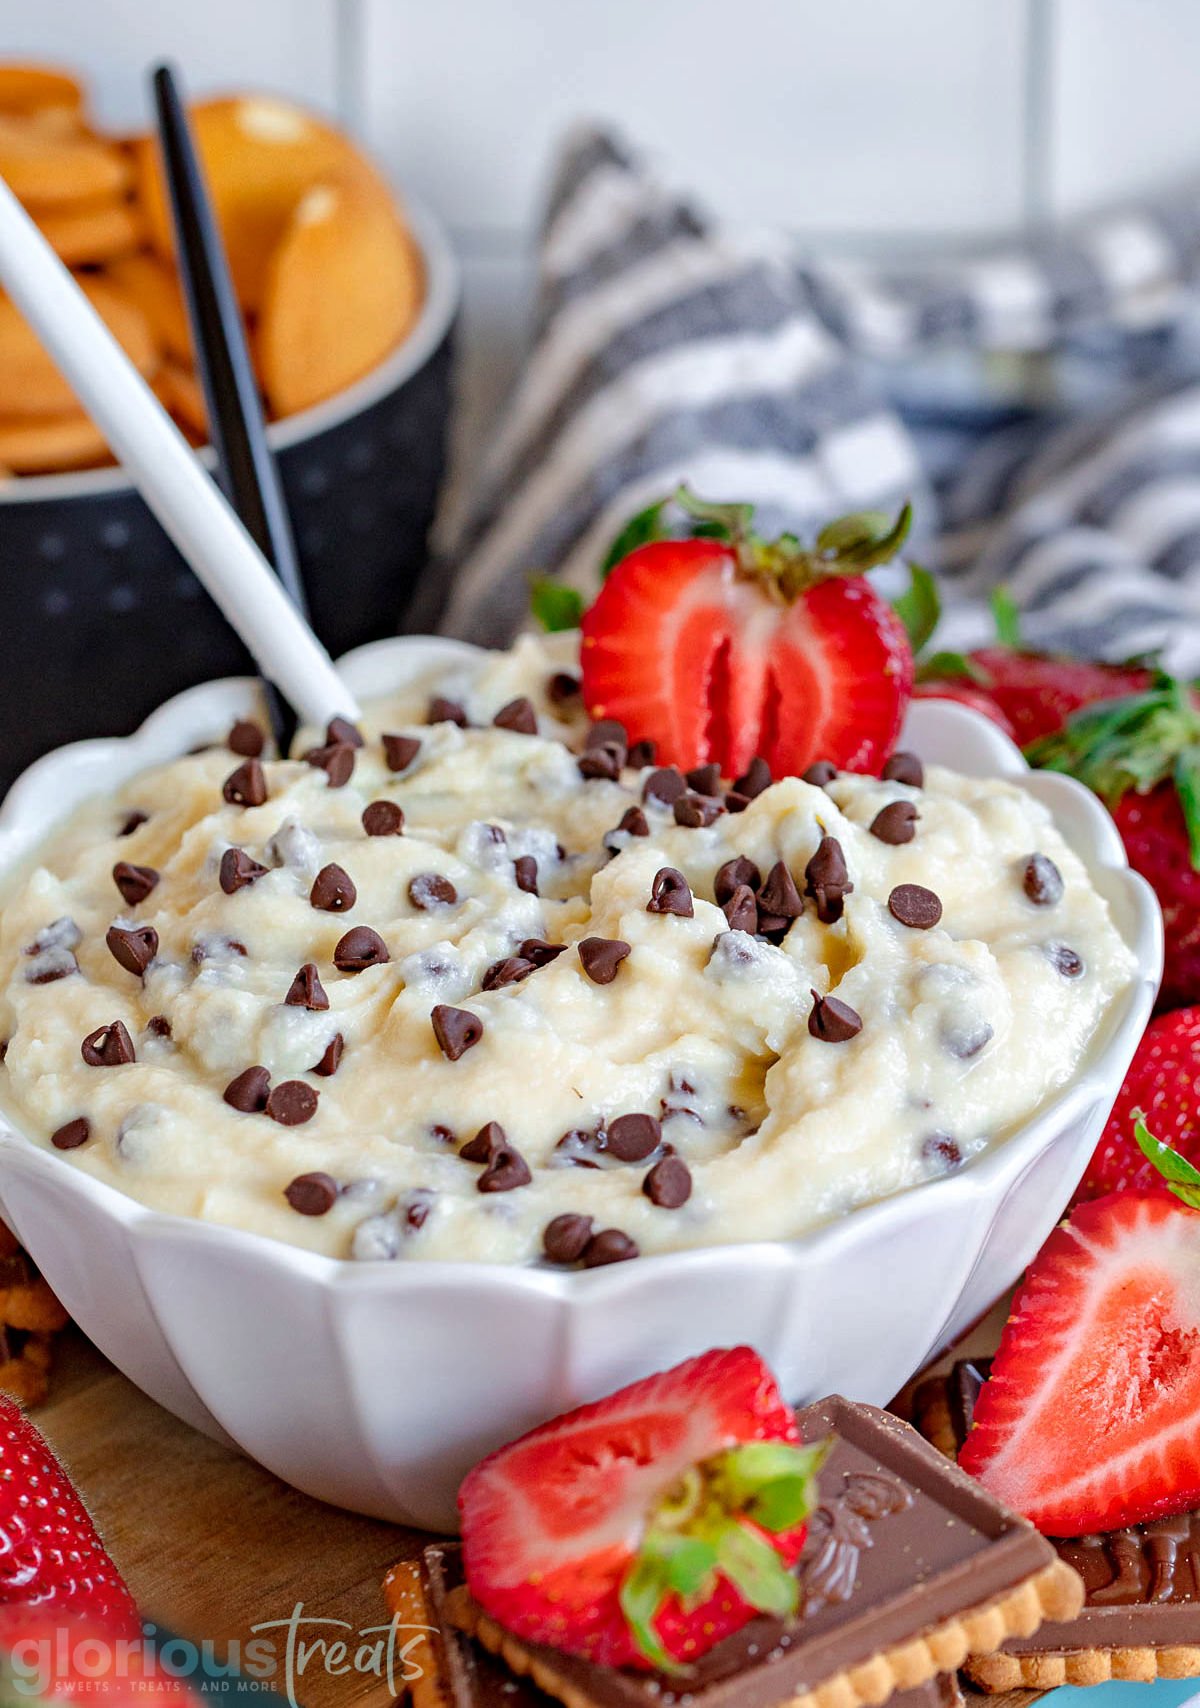 white bowl with scalloped edges filled with cannoli dip and topped with mini chocolate chips. Fresh strawberries, nilla wafers and cookie scattered around the bowl for dipping. white and black spoon inserted into dip.